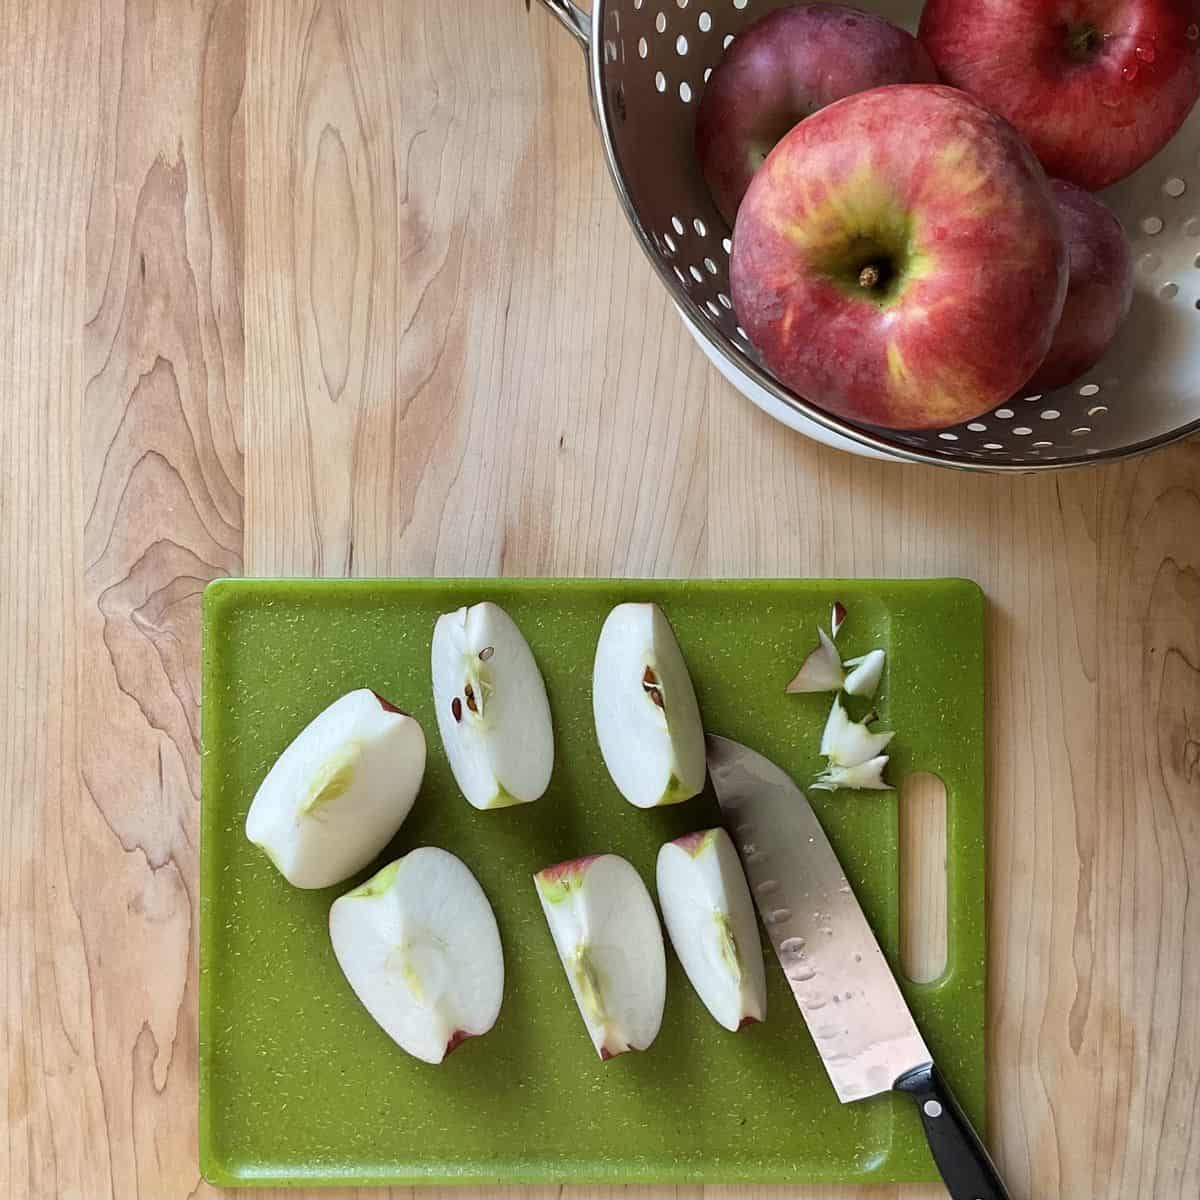 Chopped apples next to a colander of washed apples.